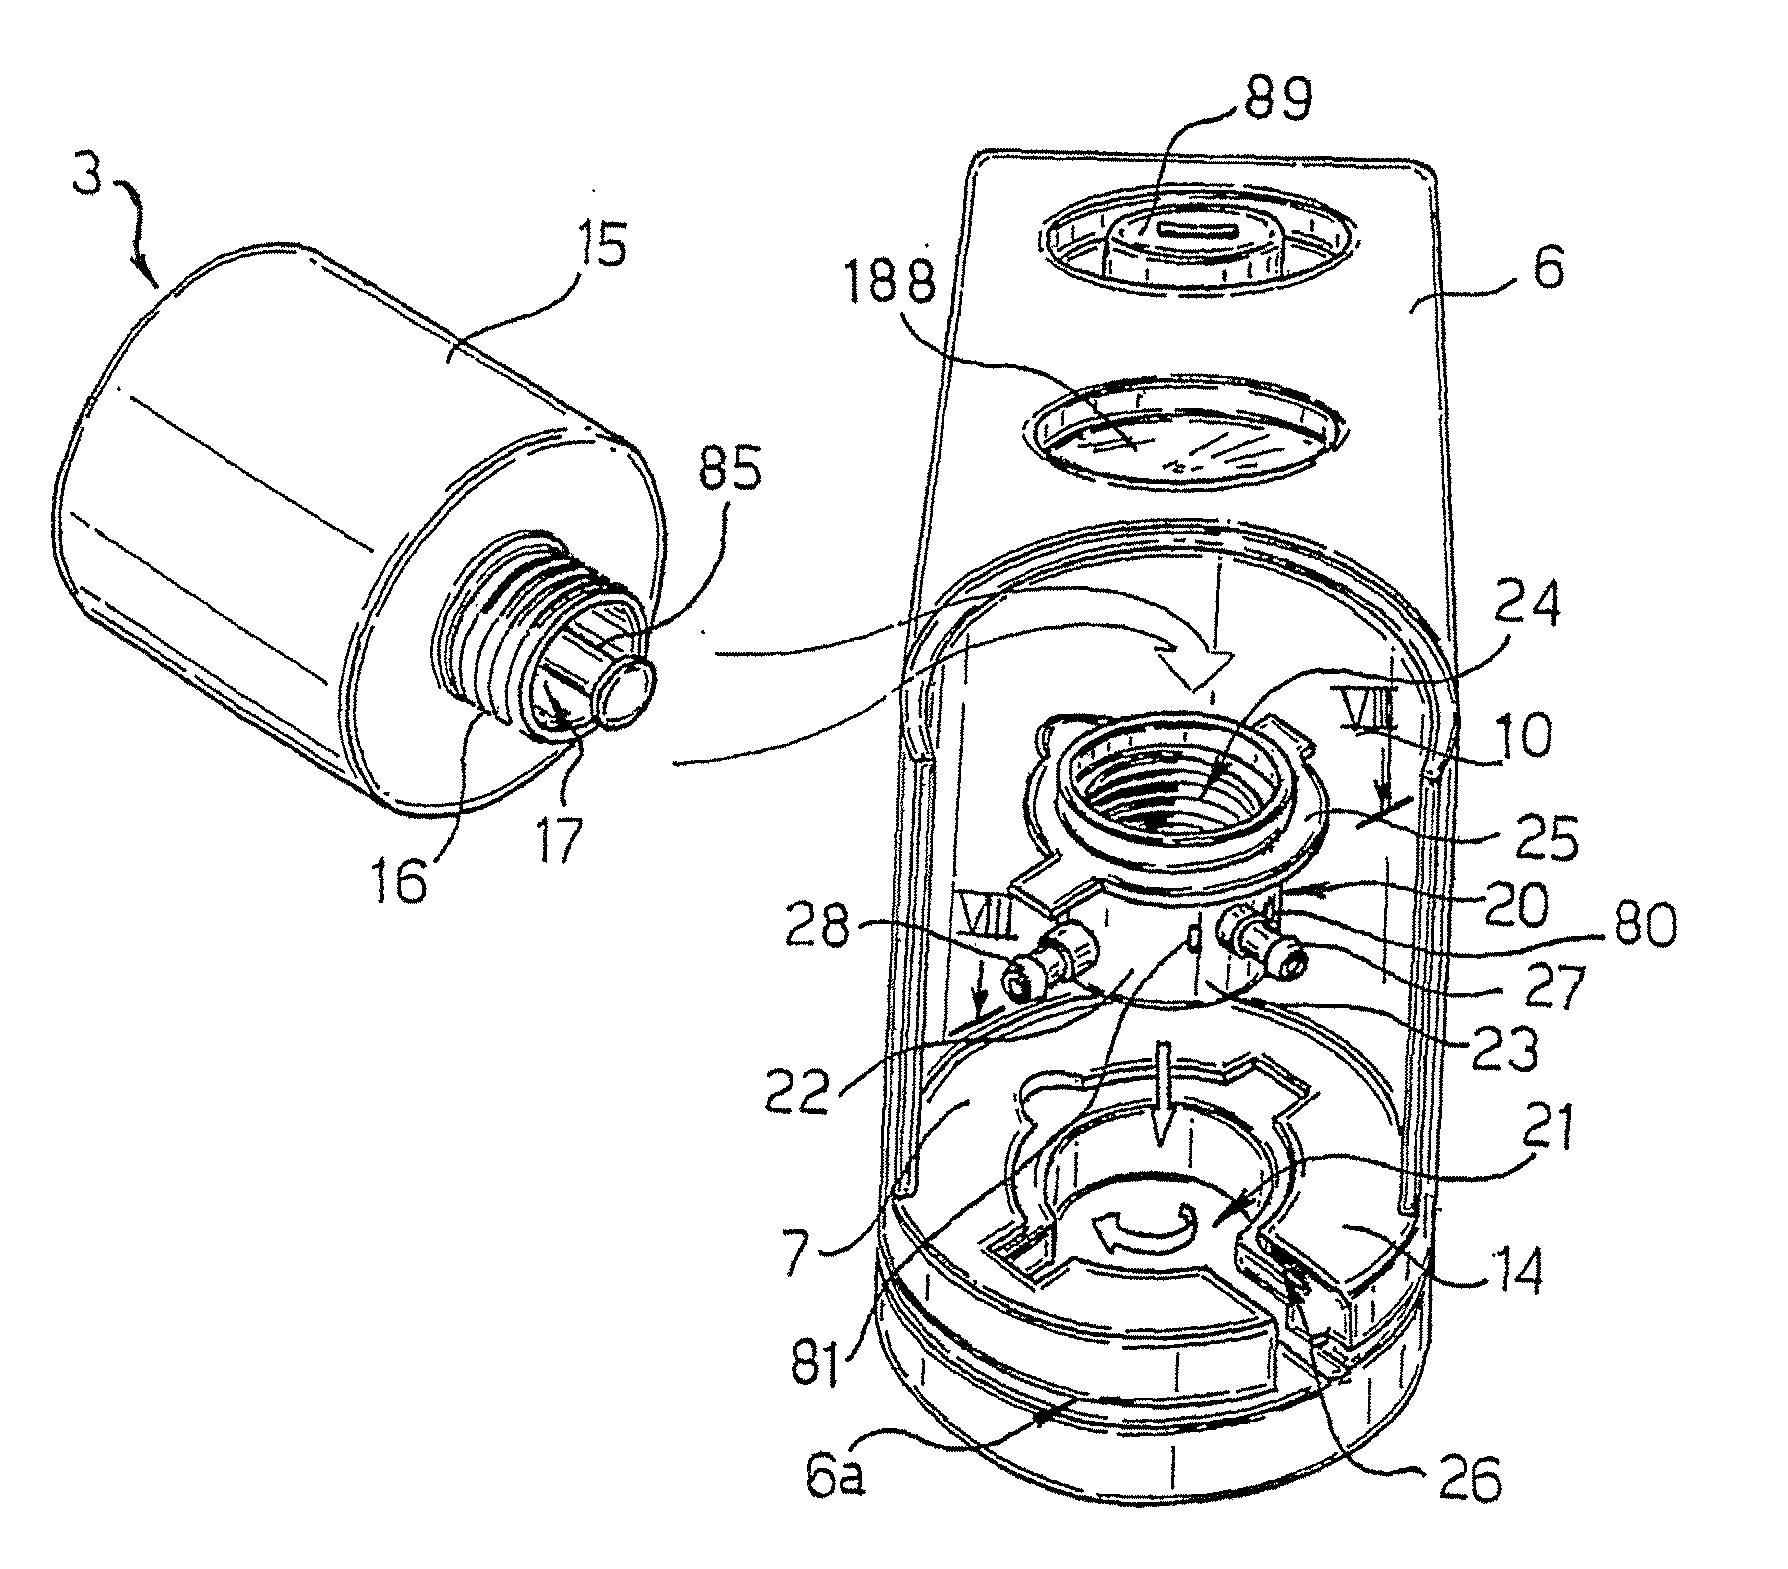 Automatic kit, with a selector valve, for repairing and inflating inflatable articles